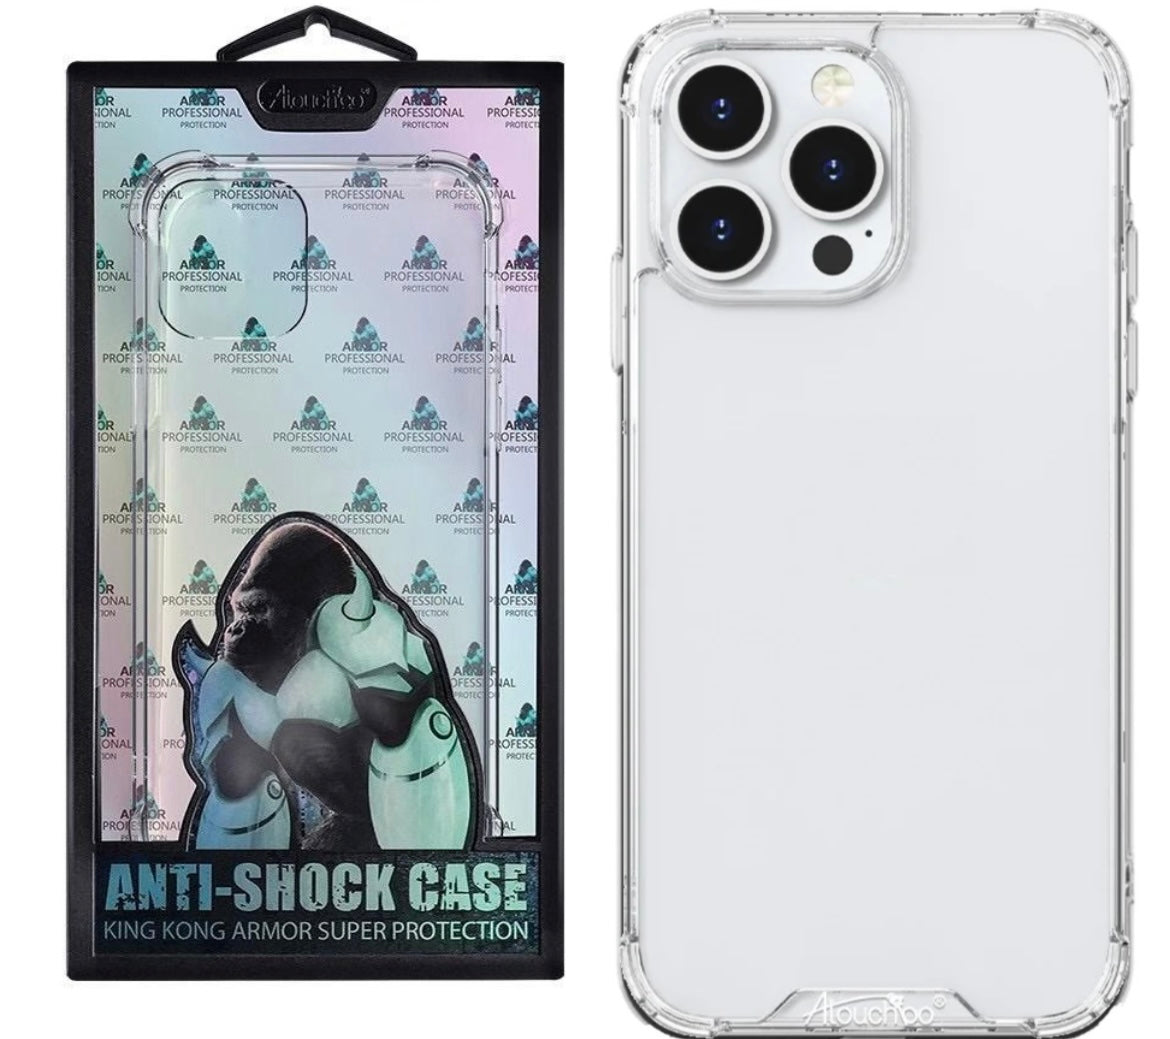 Cases For iPhone 11 Pro Max saynama